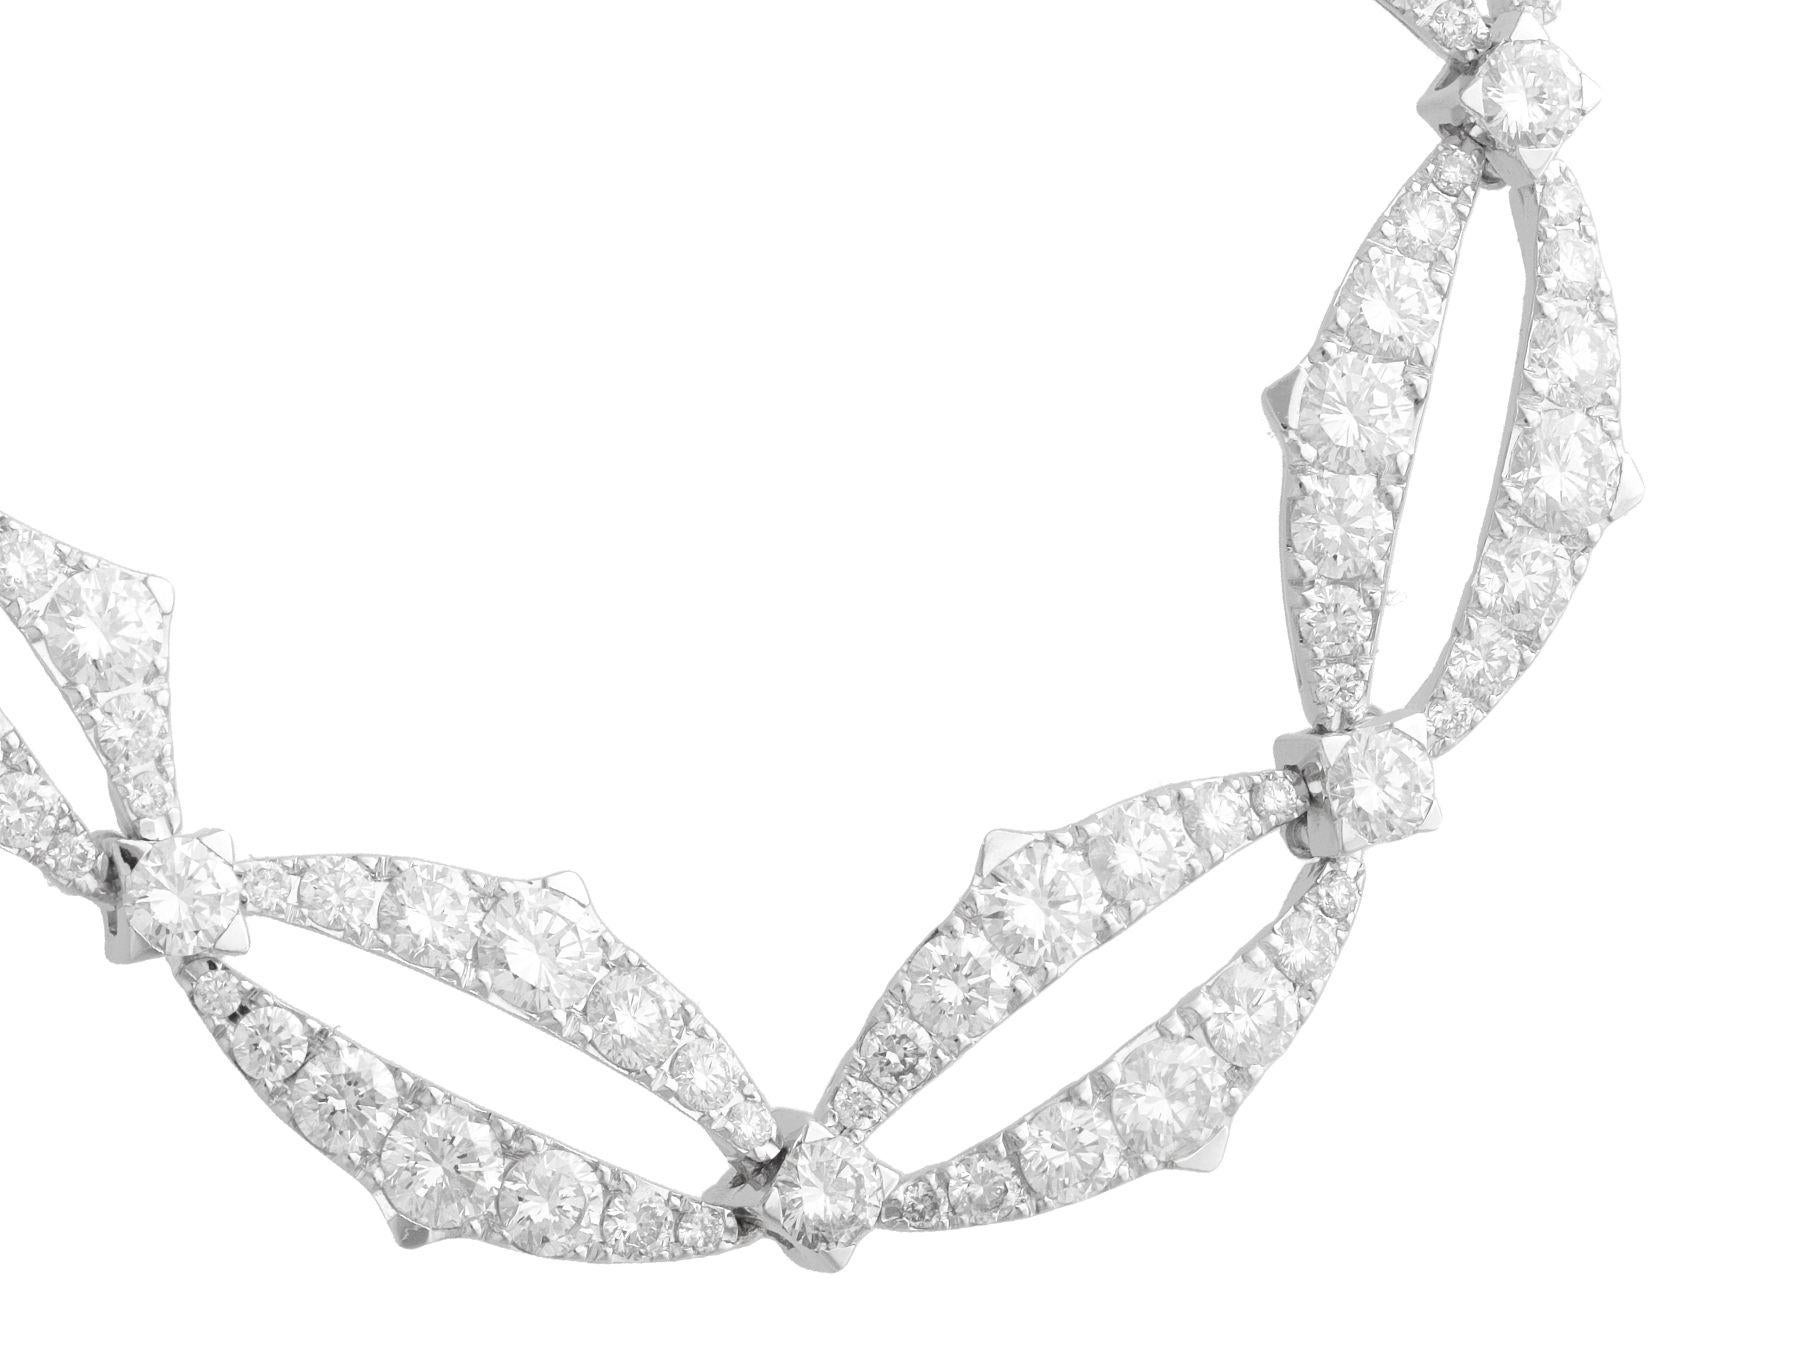 Round Cut Contemporary 15.12 Carat Diamond and White Gold Necklace by Stephen Webster For Sale